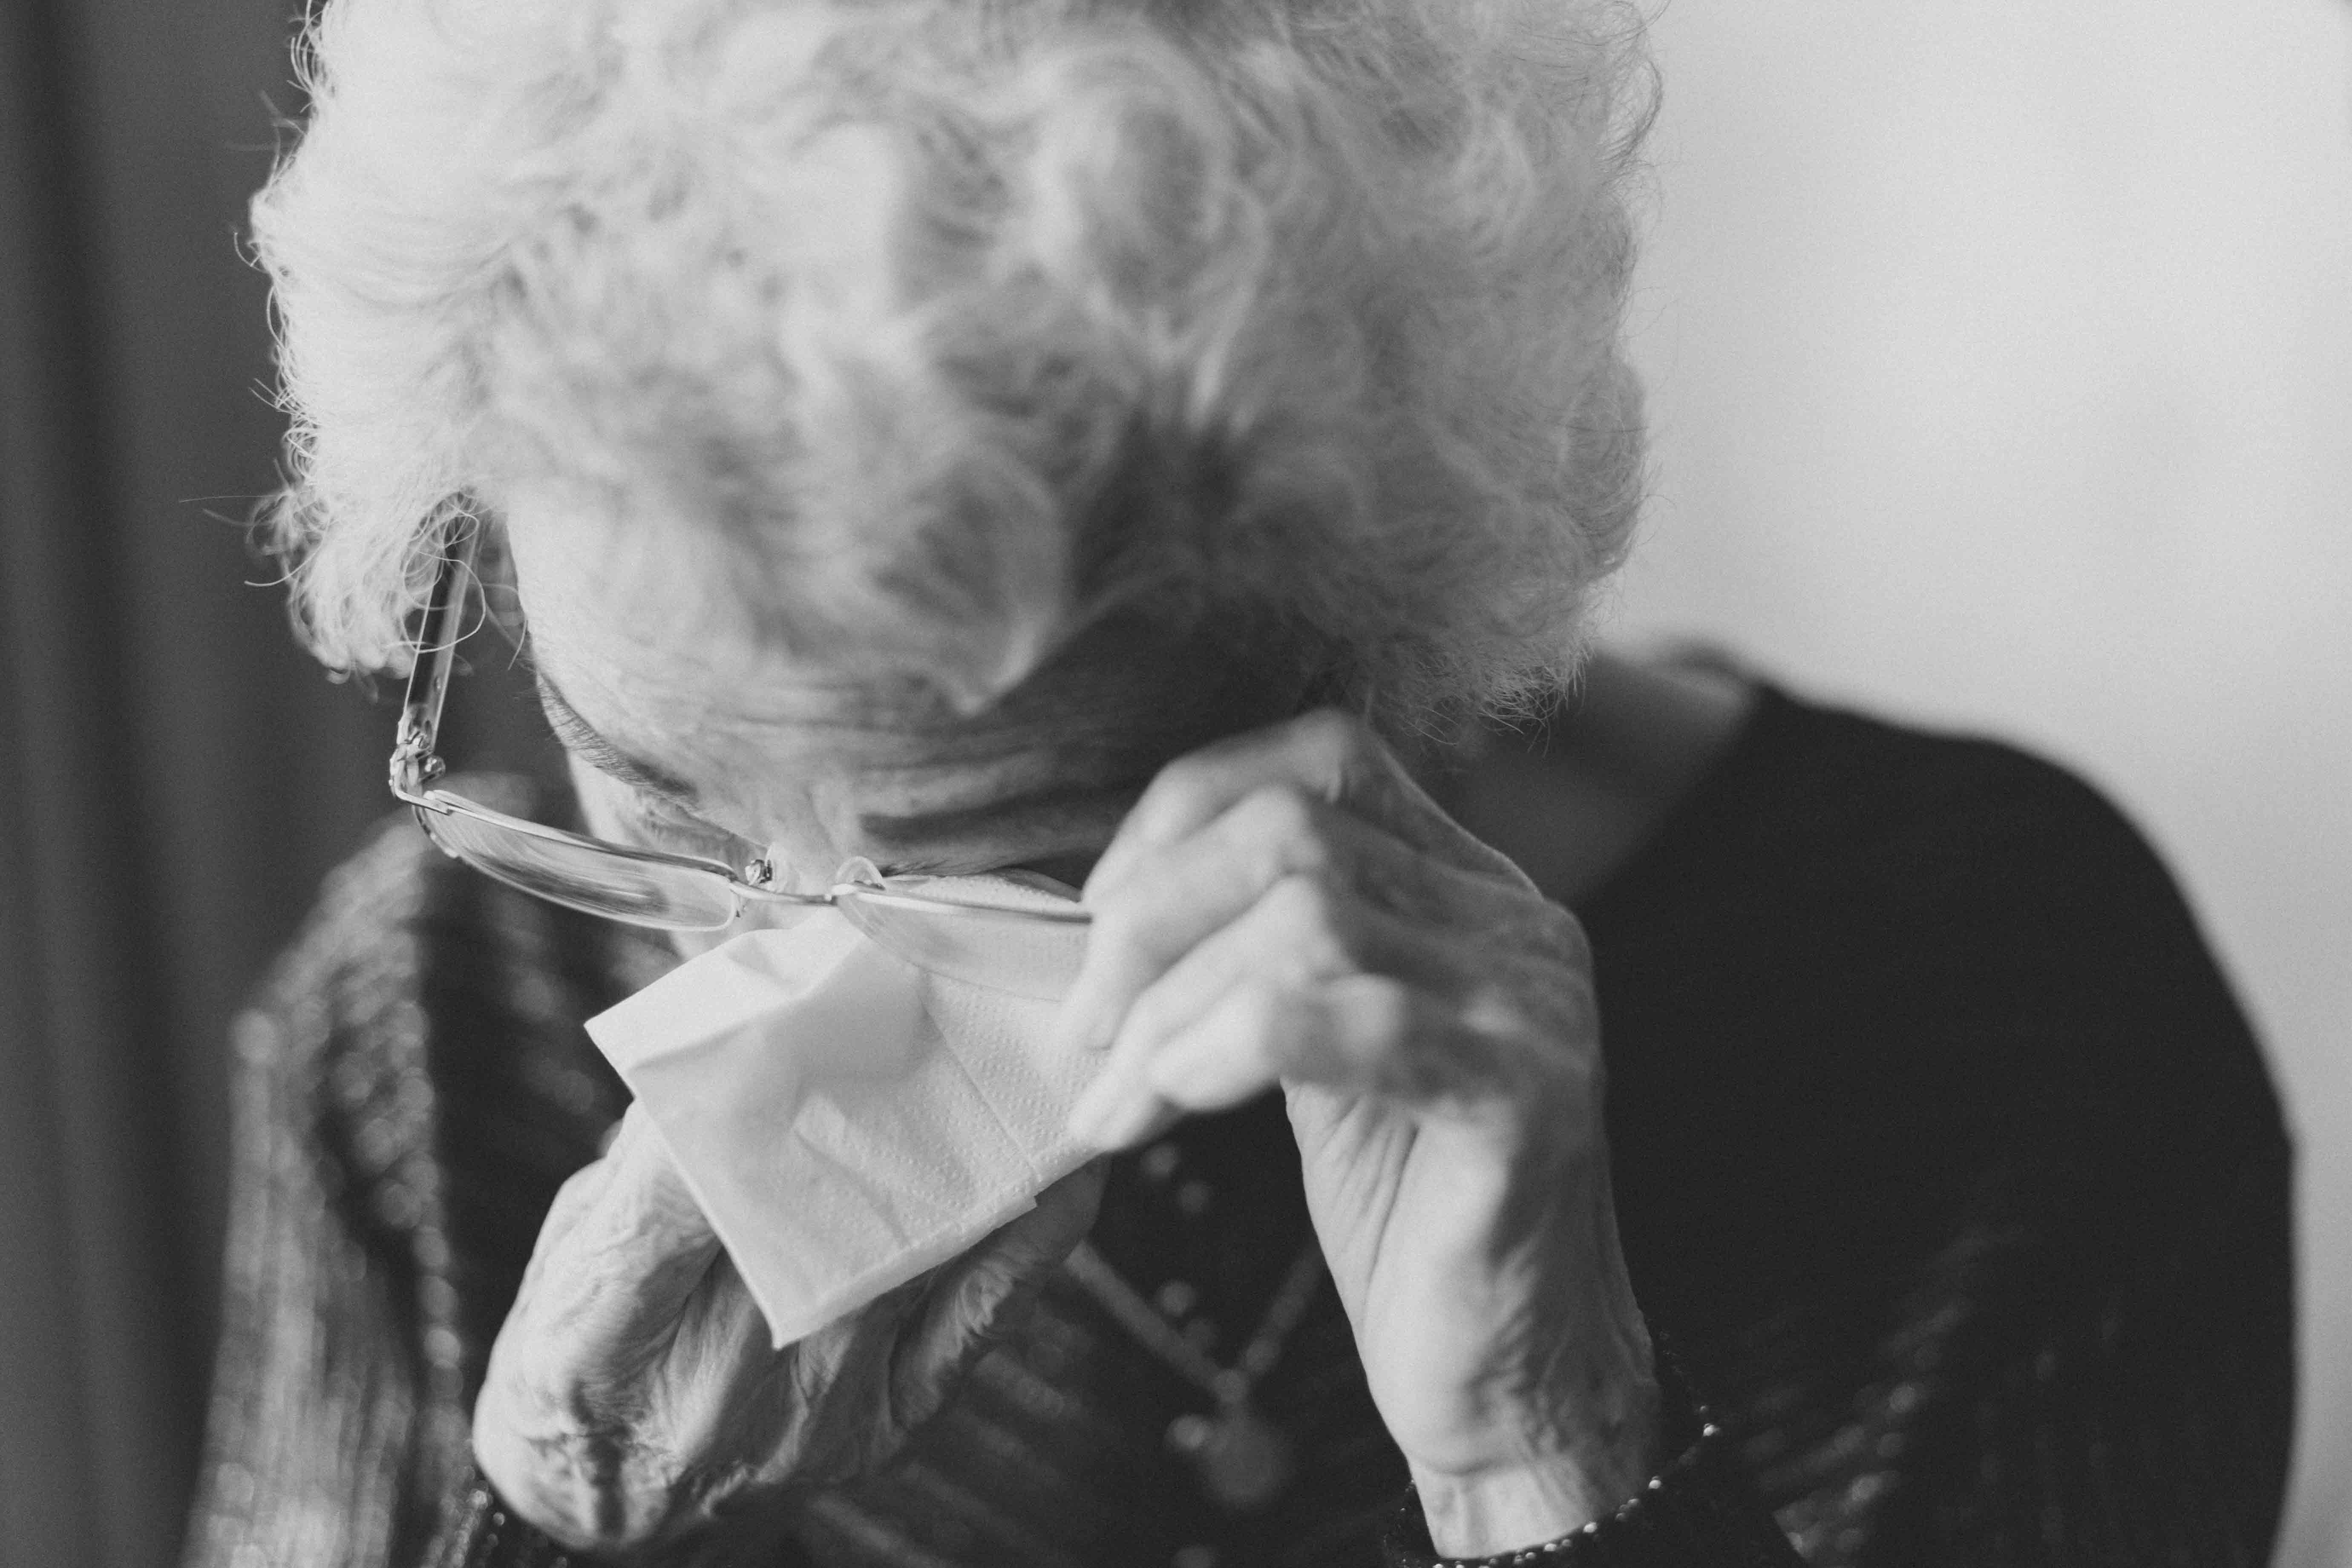 The grandma developed health issues at 75, prompting OP's dad to provide in-depth care. | Source: Unsplash